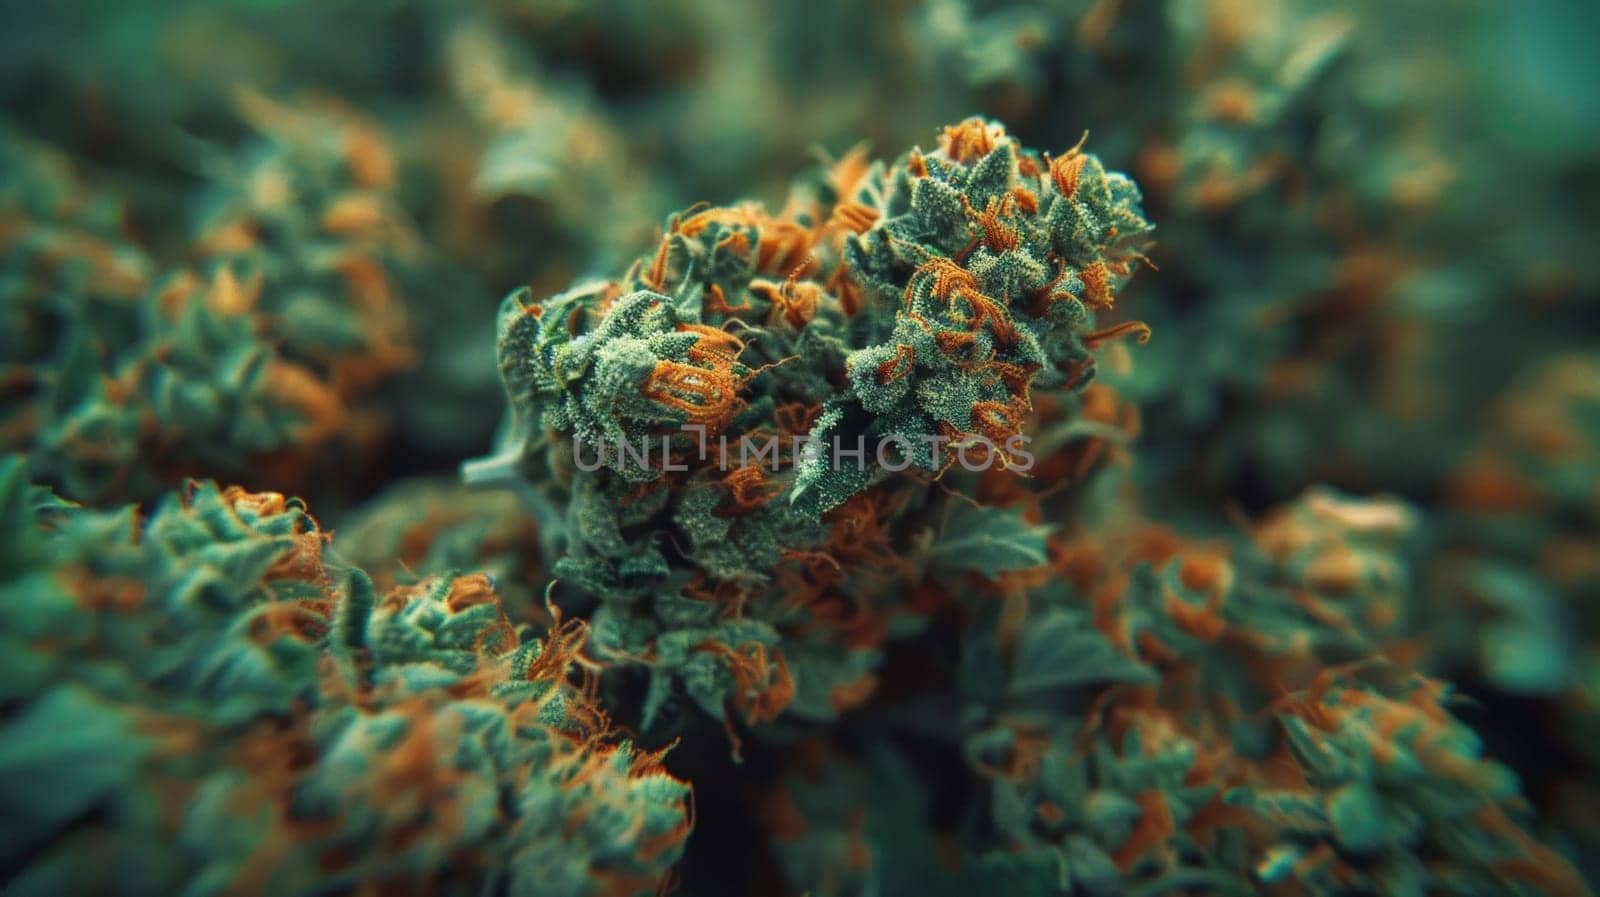 A close up of a marijuana plant with orange and green leaves